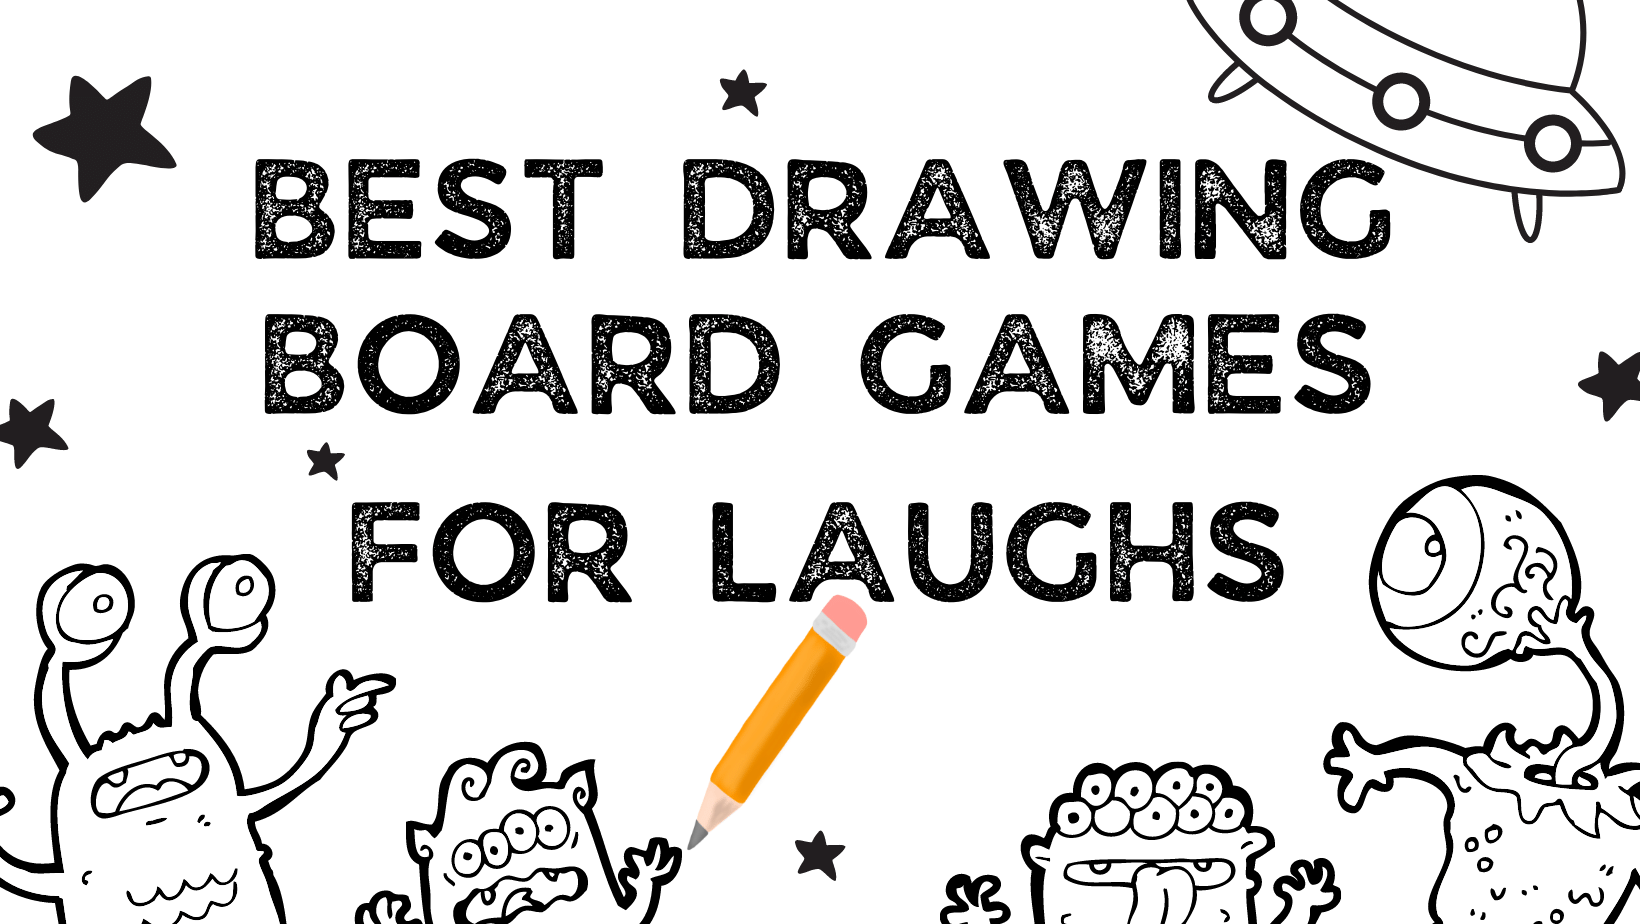 Best Drawing board games for laughs